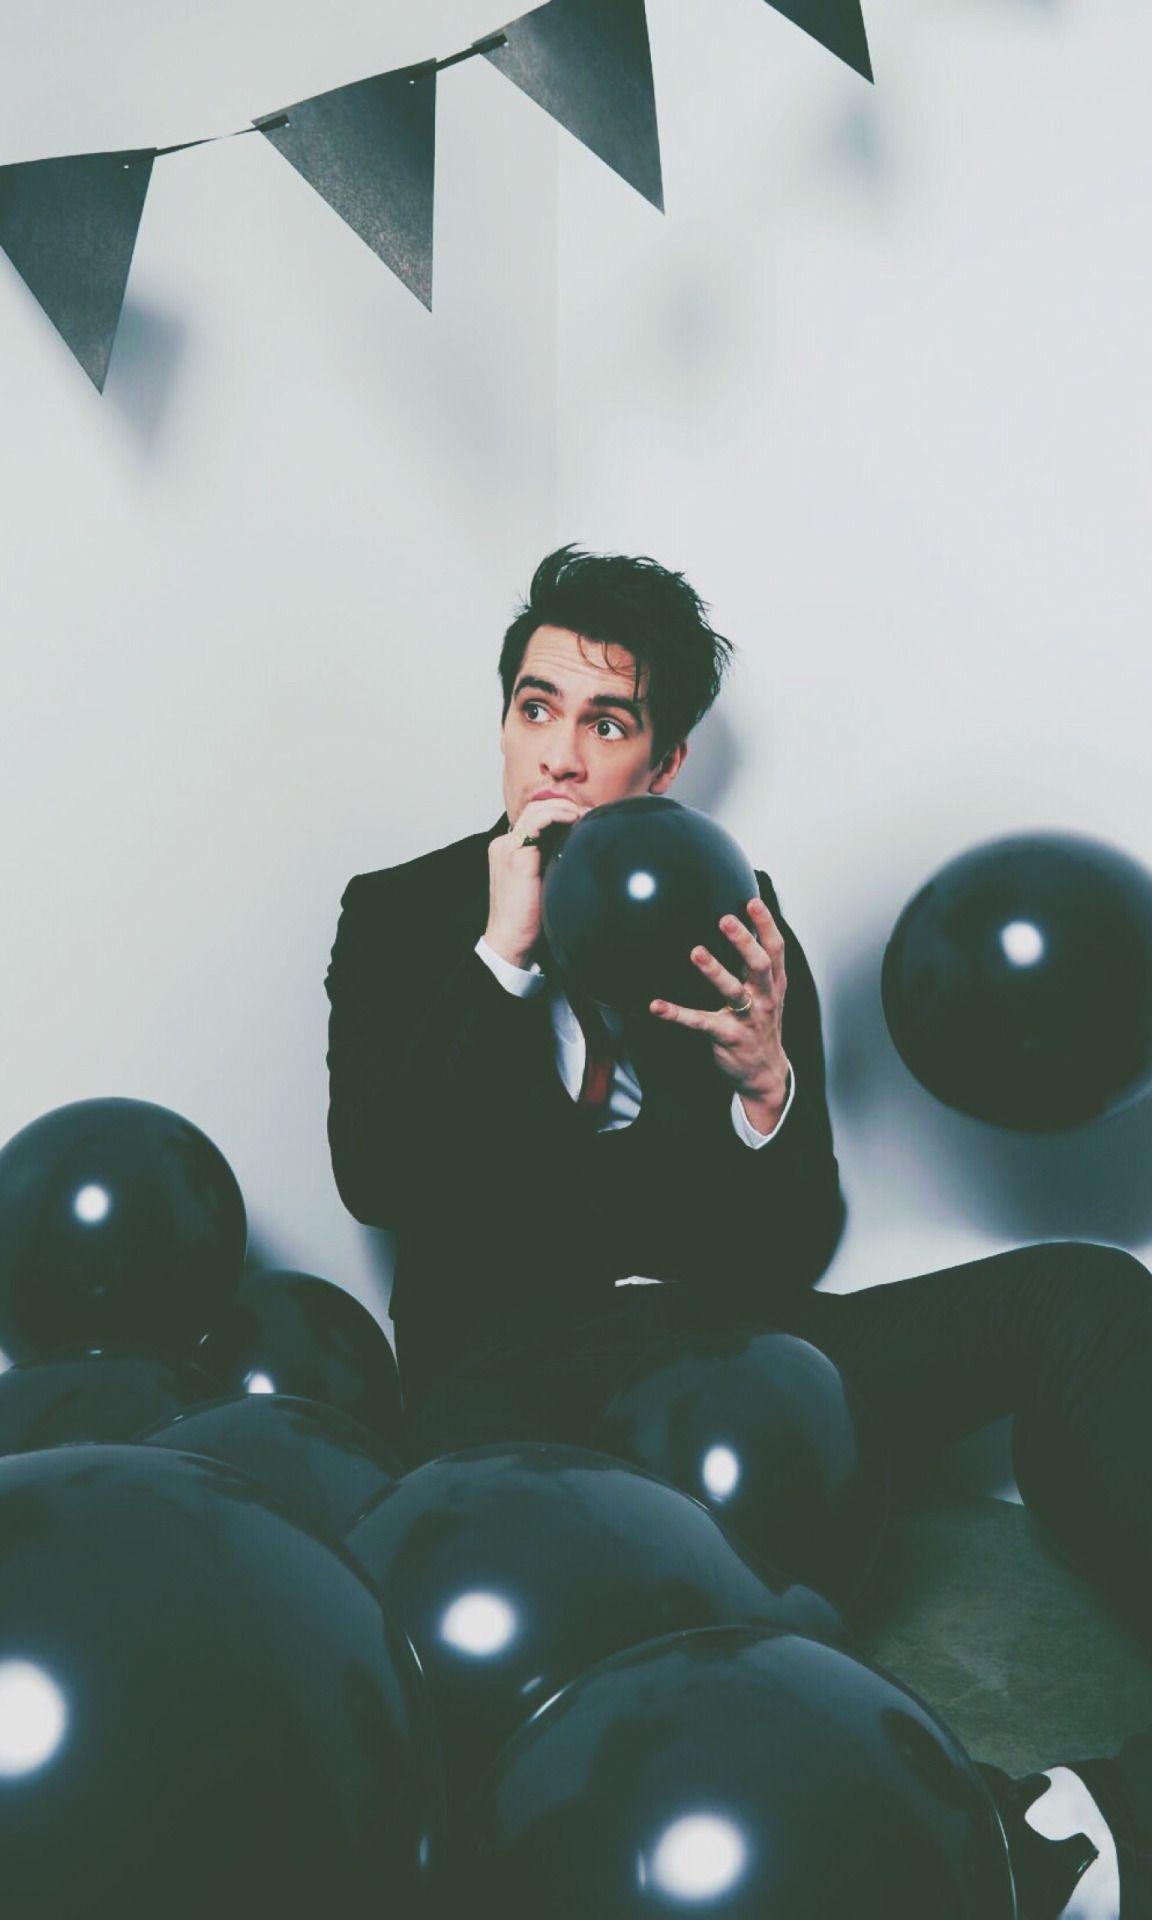 Brendon Urie: American singer, The lead vocalist of PATD. 1160x1920 HD Wallpaper.